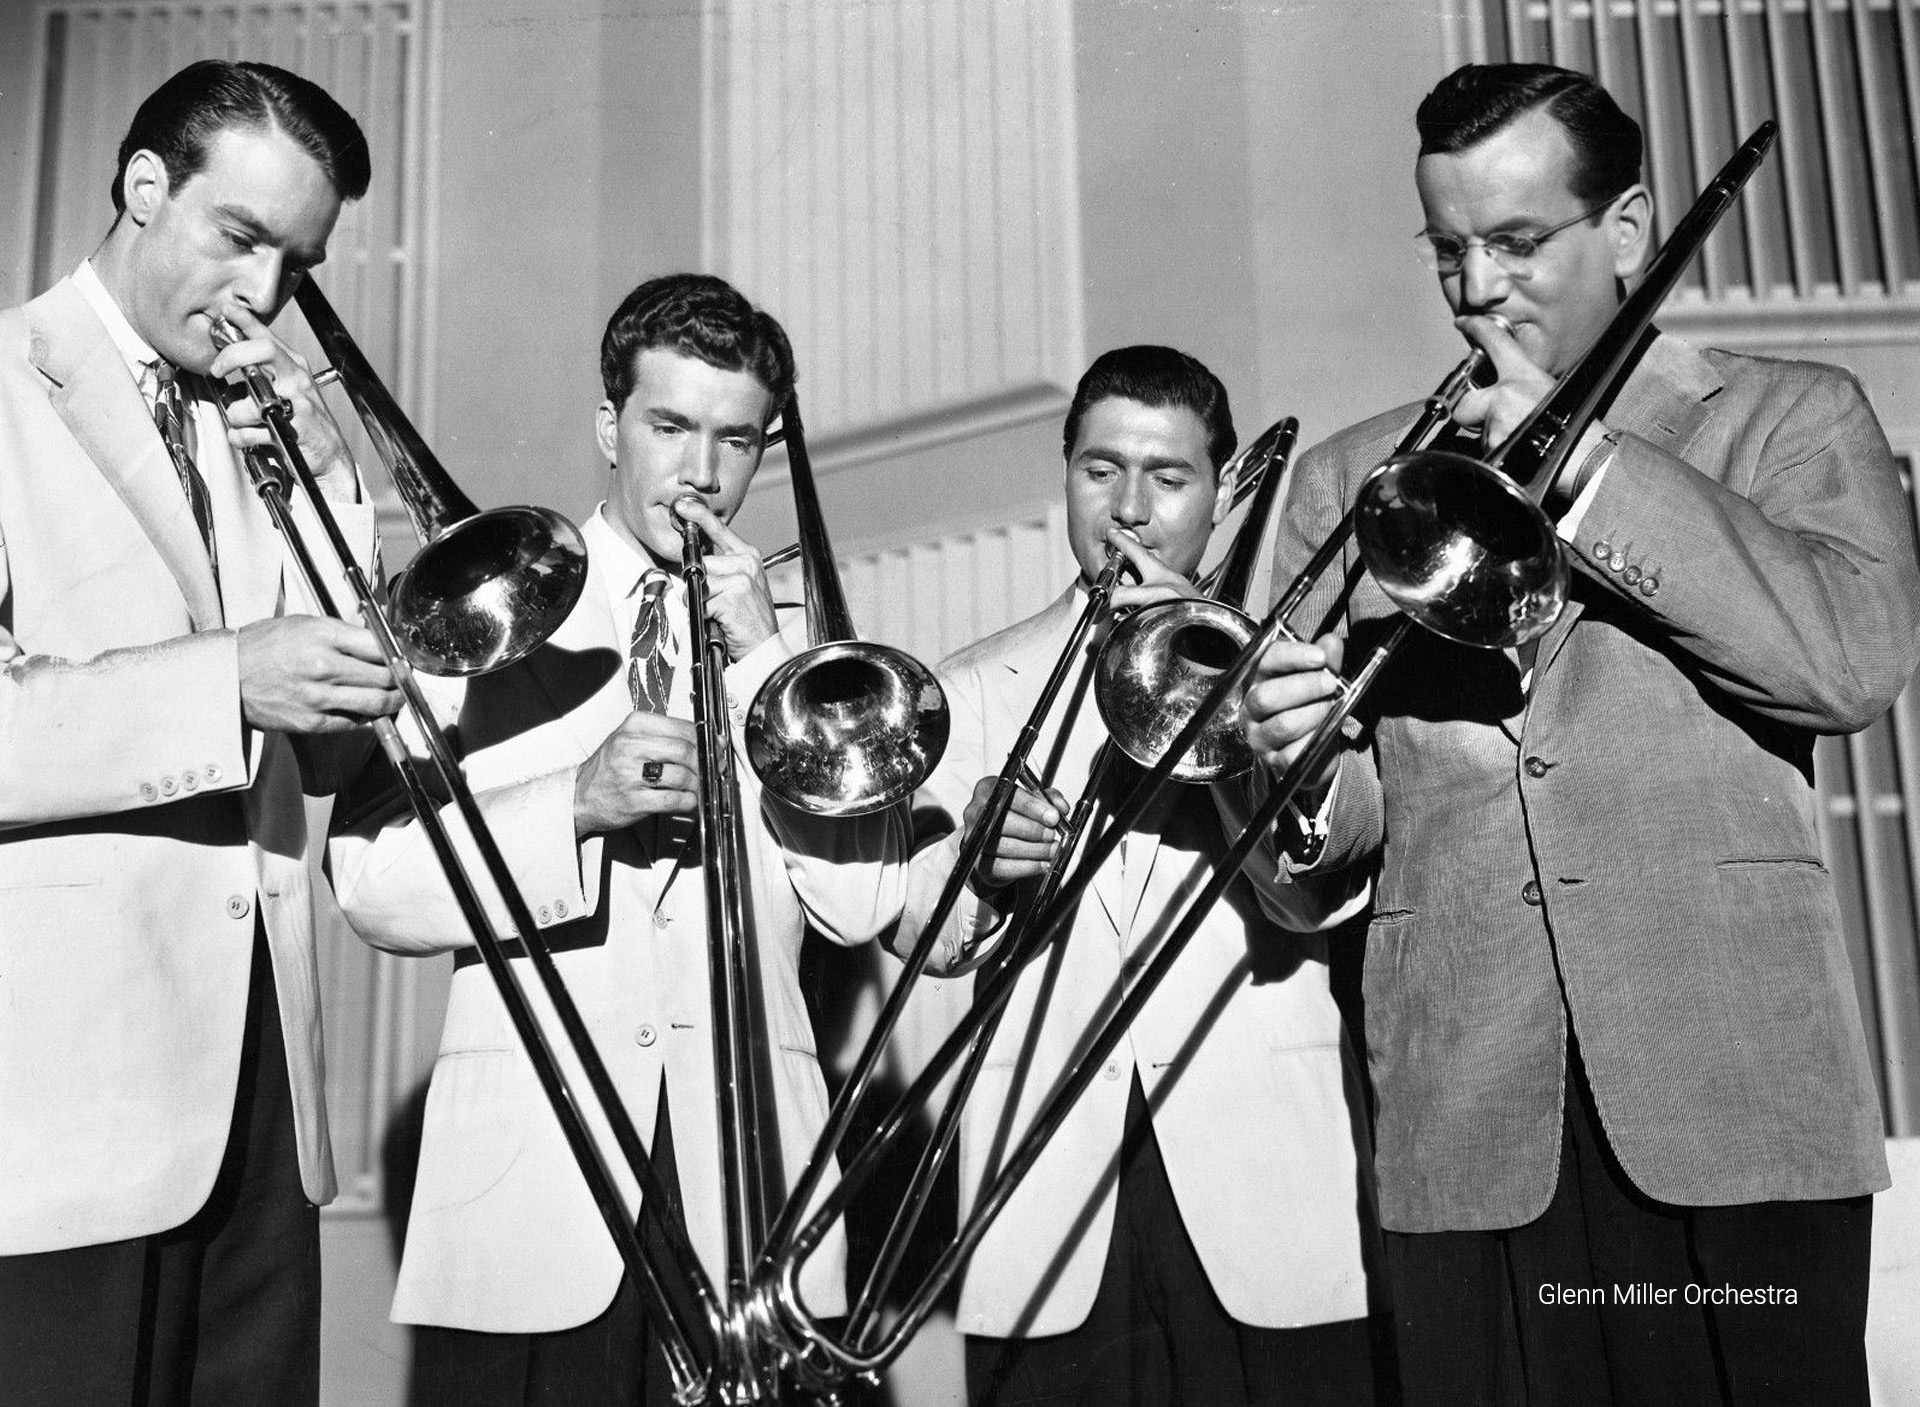 Glenn Miller and artists of your orchestra